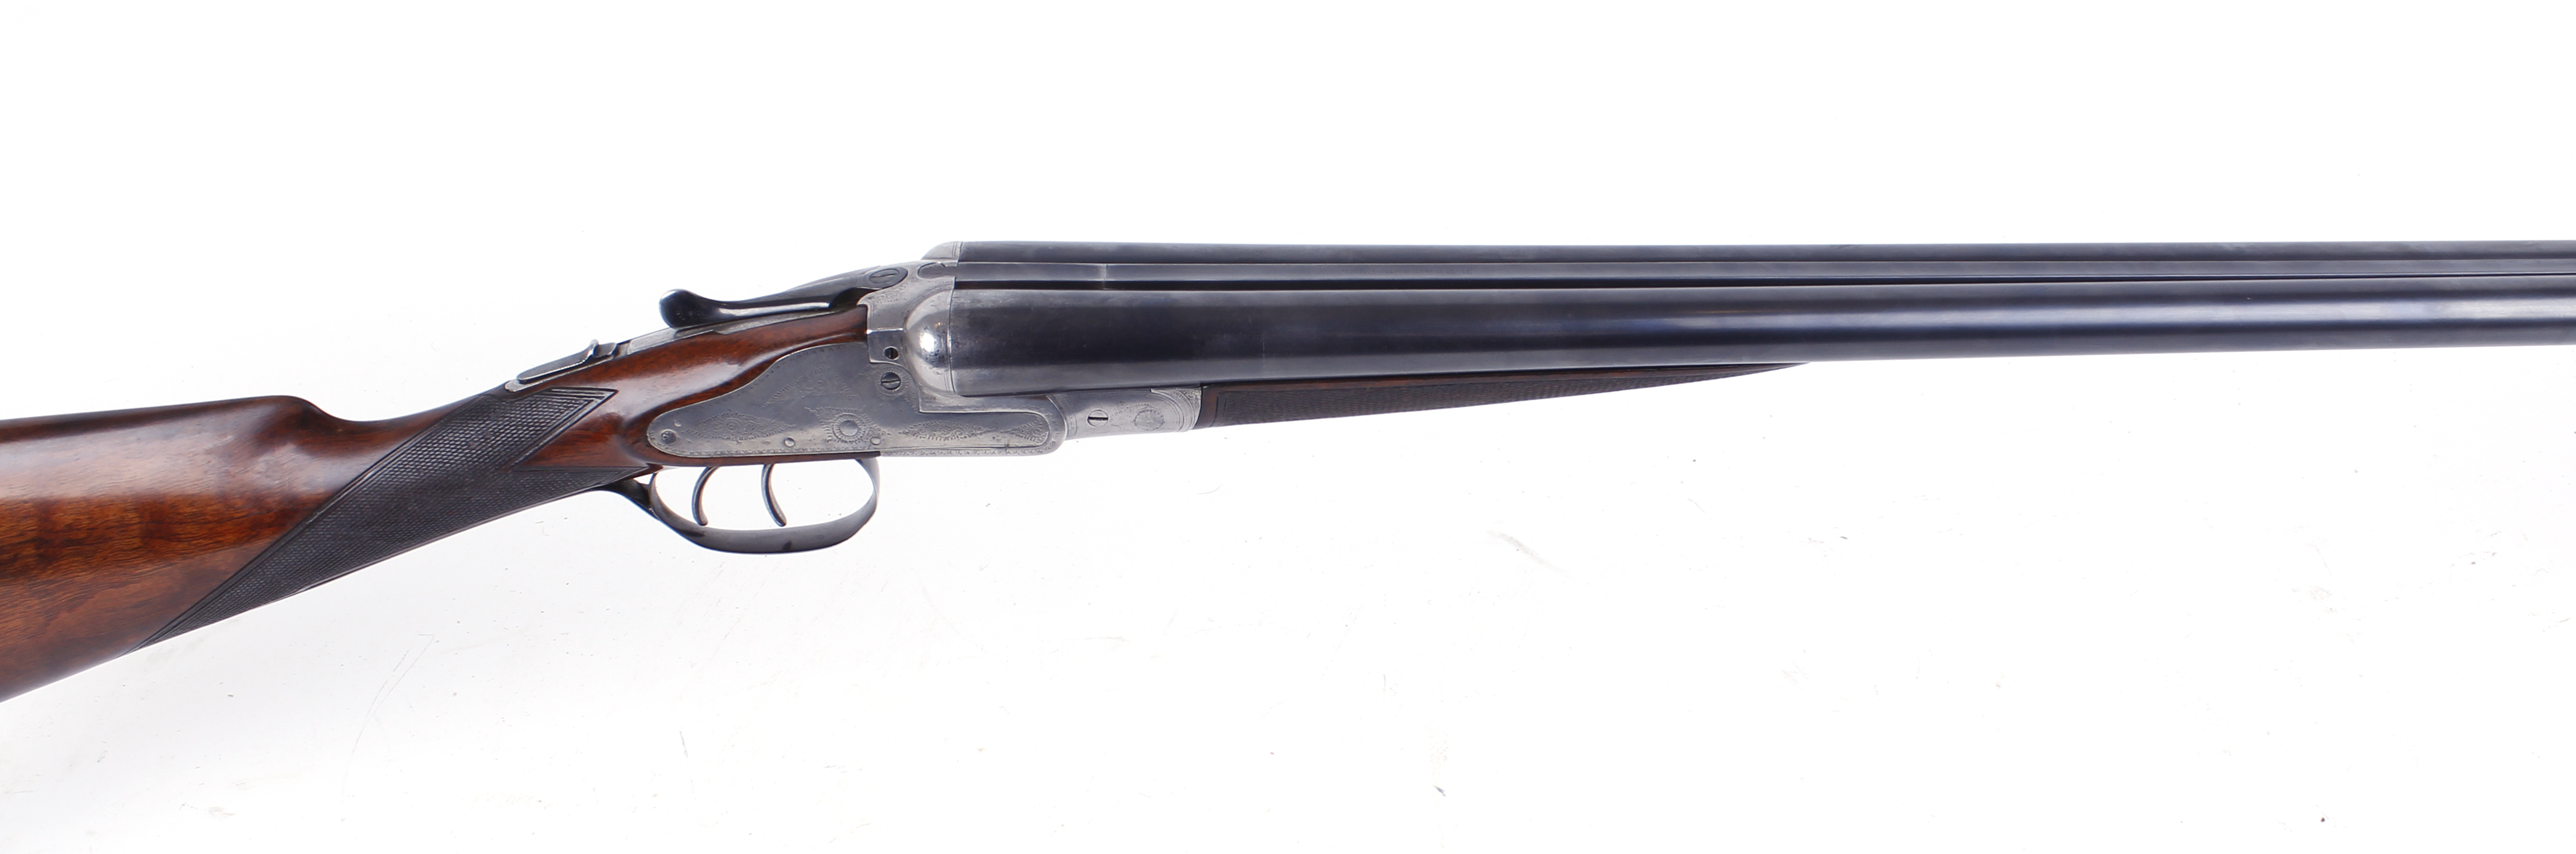 S2 12 bore sidelock non ejector, English, 28 ins sleeved barrels, ic & ¼, the top rib inscribed R.